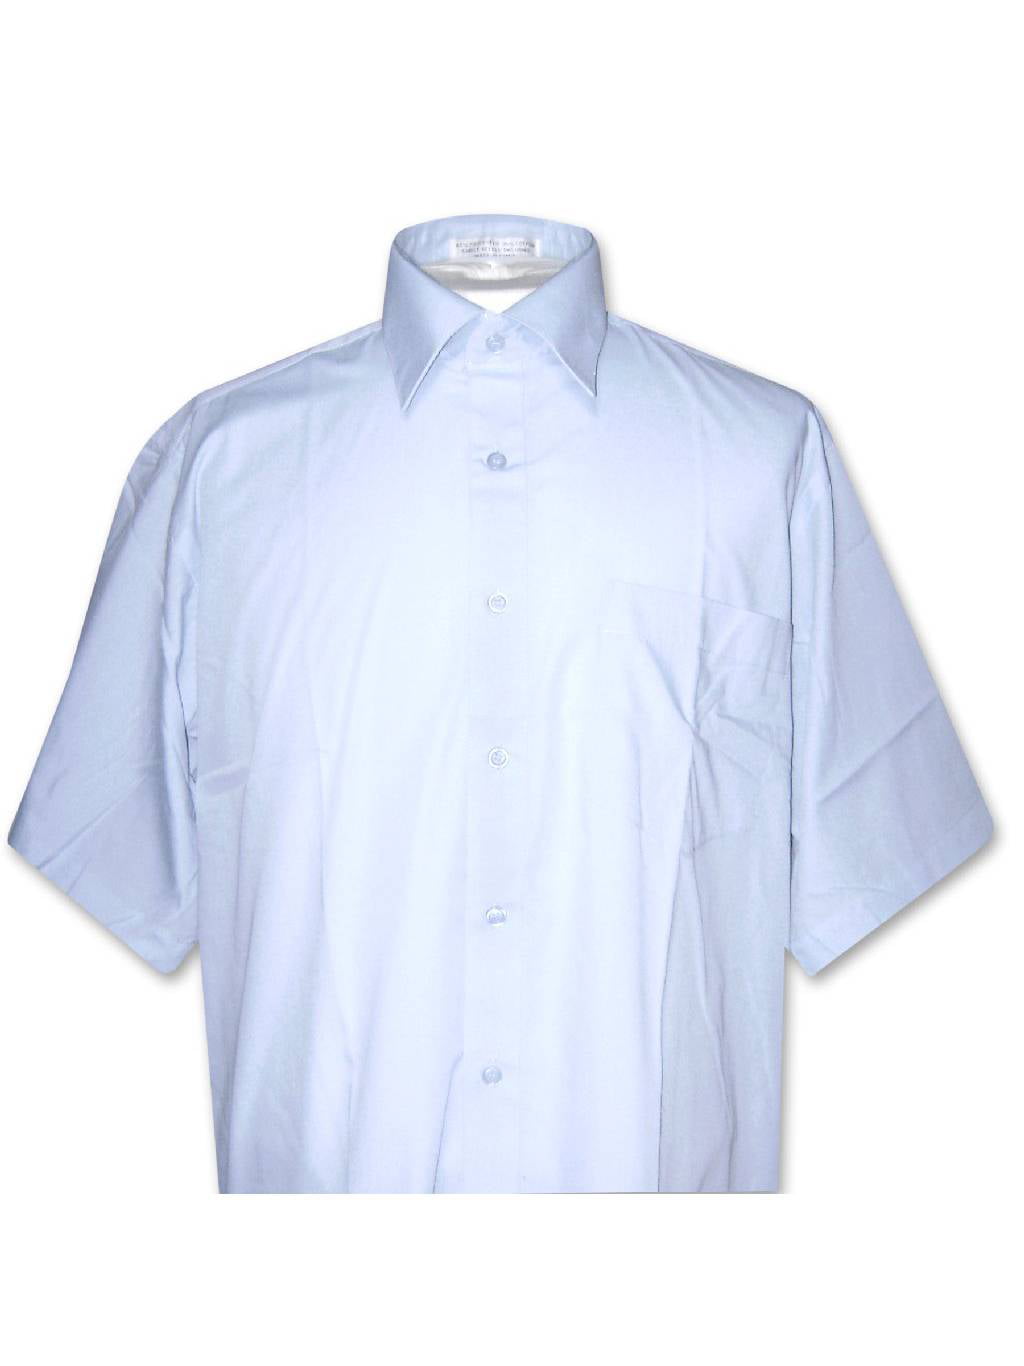 New KUSTOM KIT Workplace Oxford Blouse Long Sleeved in 5 colours 8-20 